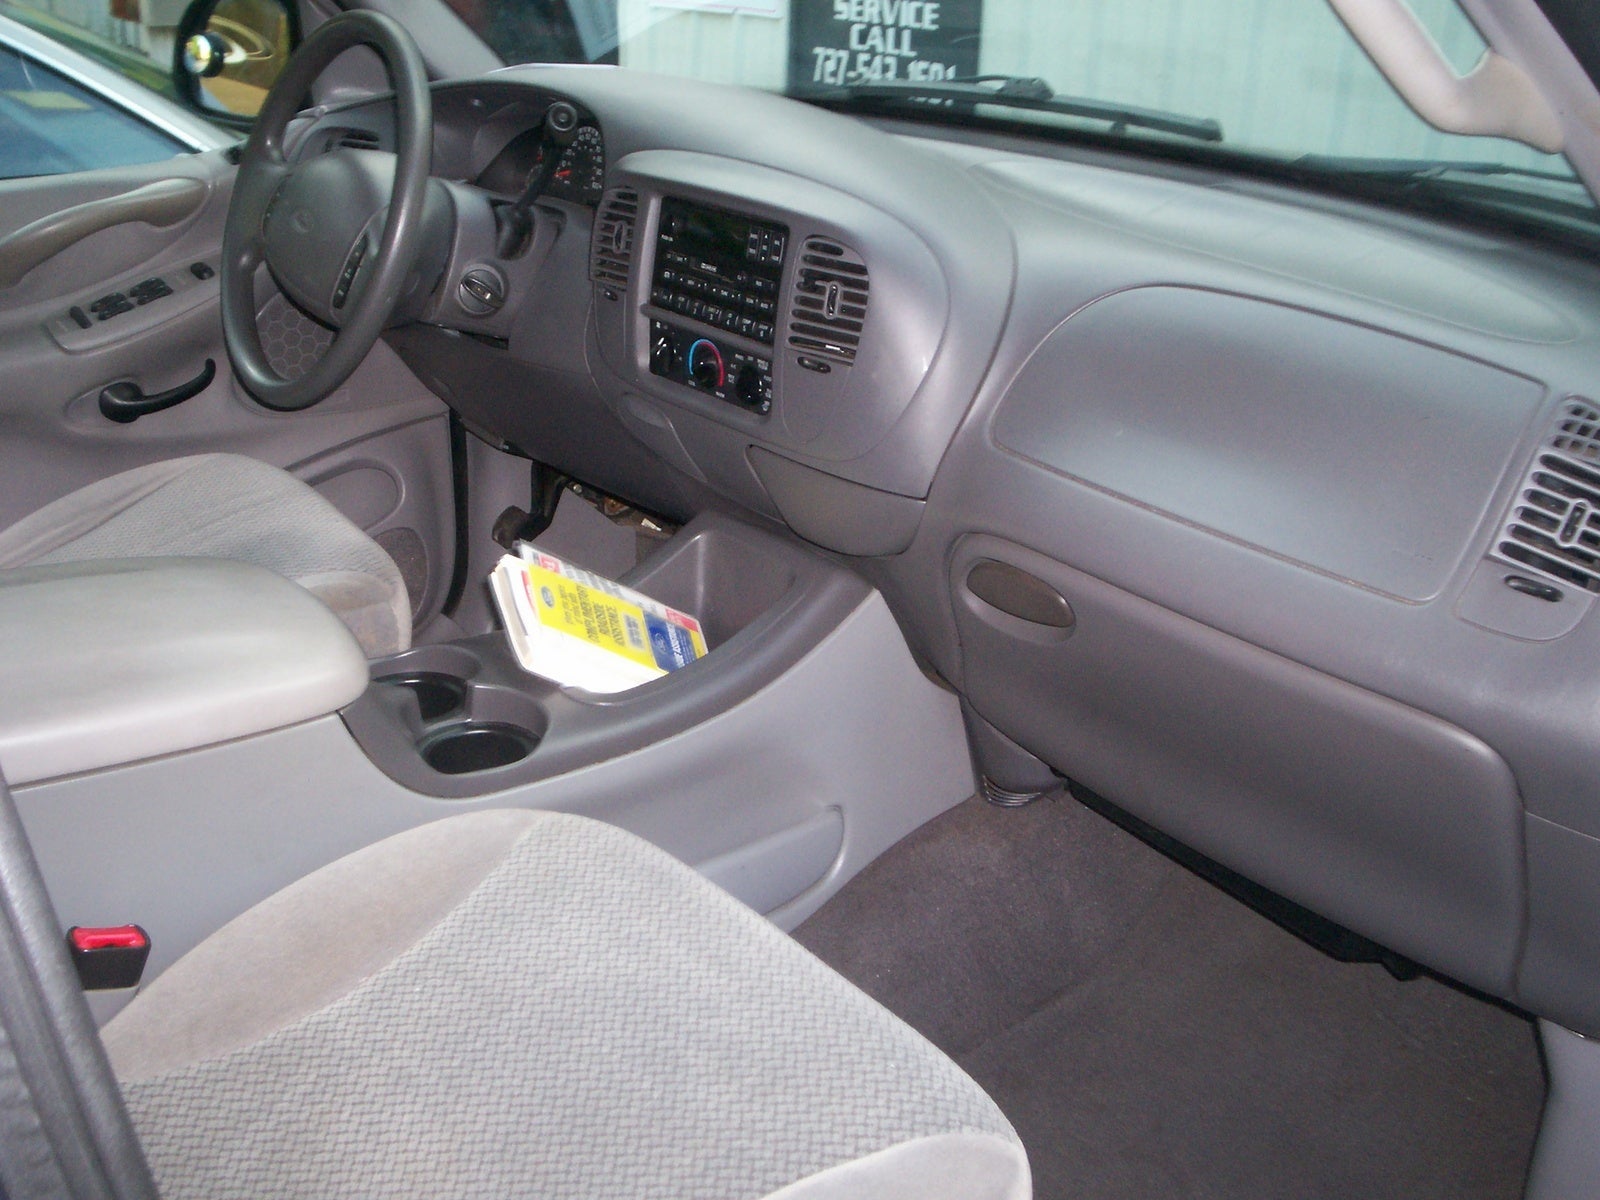 2000 Ford expedition interior dimensions #8